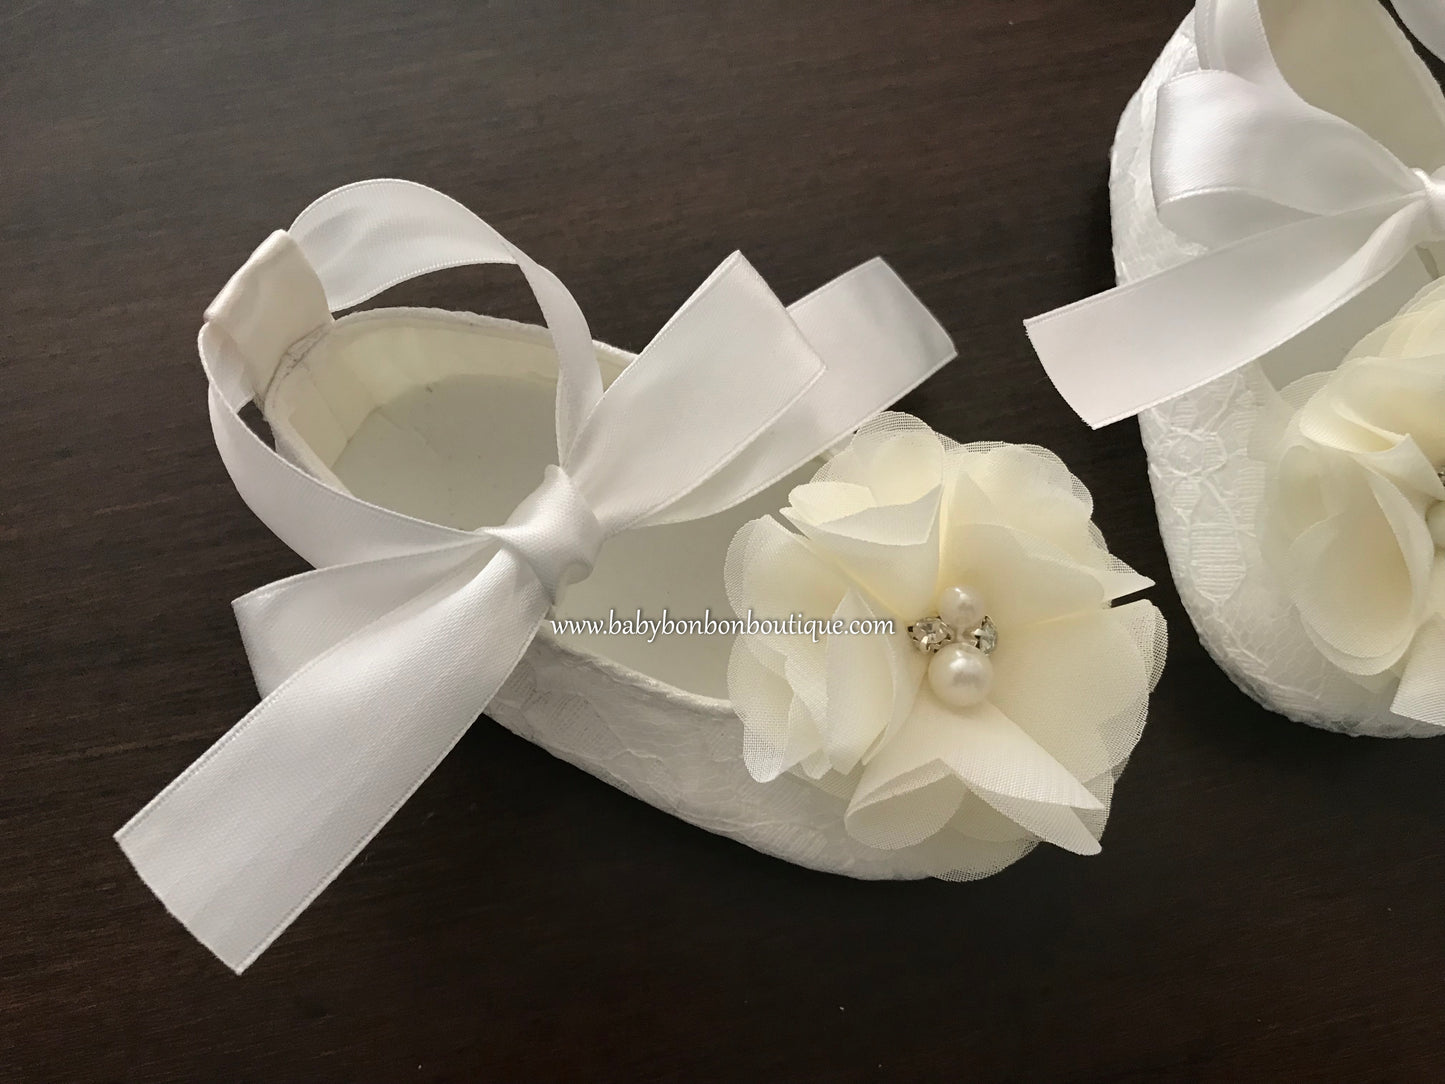 White Christening Shoes with Flowers, Pearls & Rhinestones